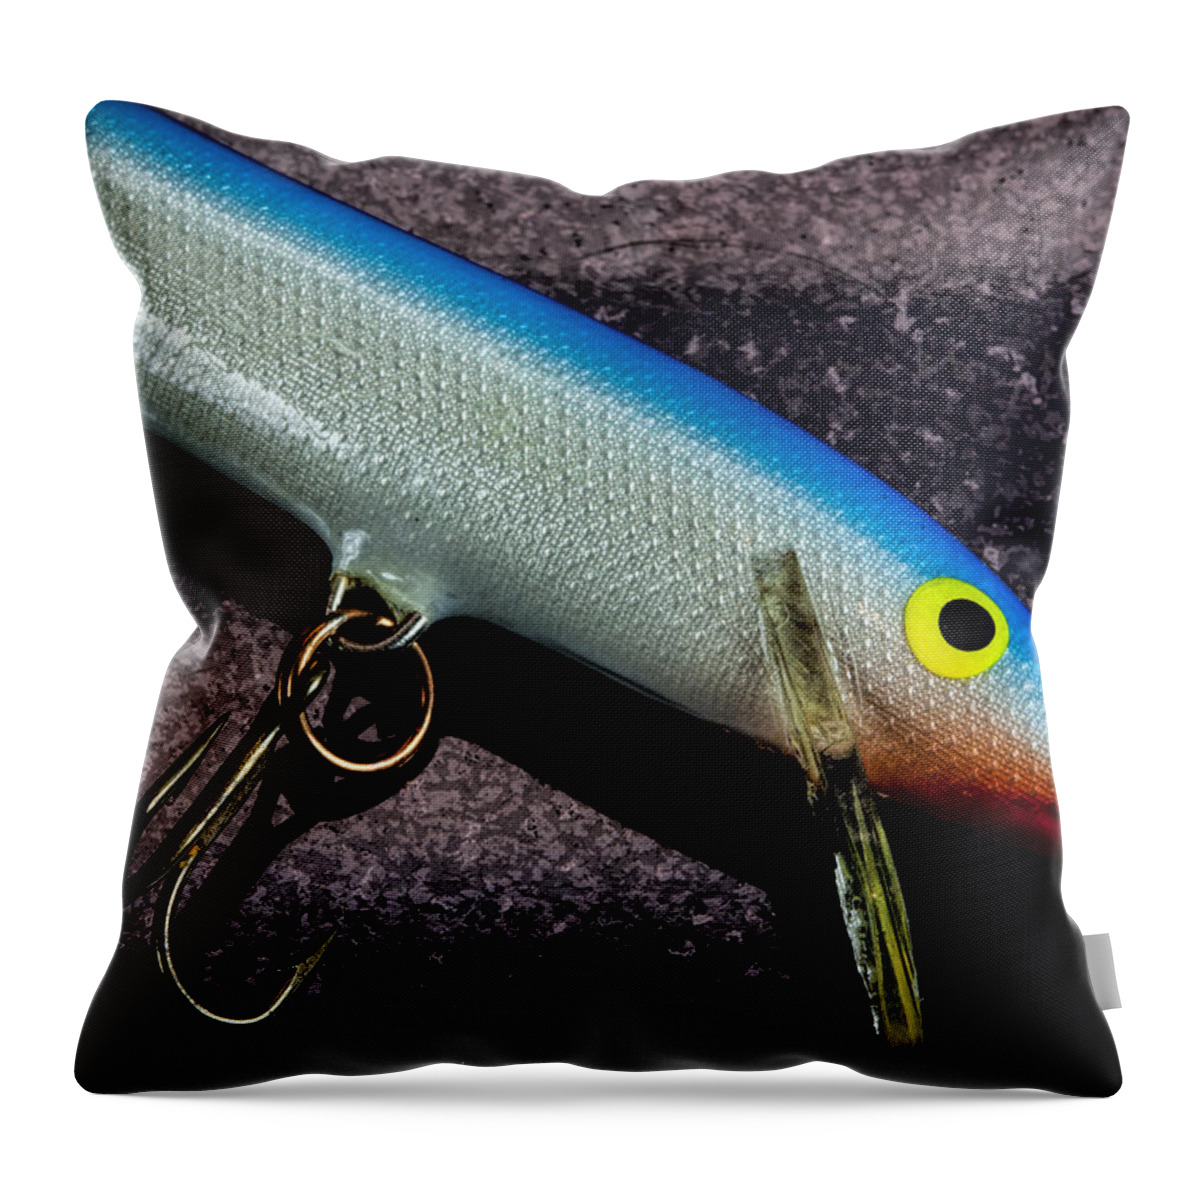 Rapala Throw Pillow featuring the photograph Classic Rapala by John Crothers